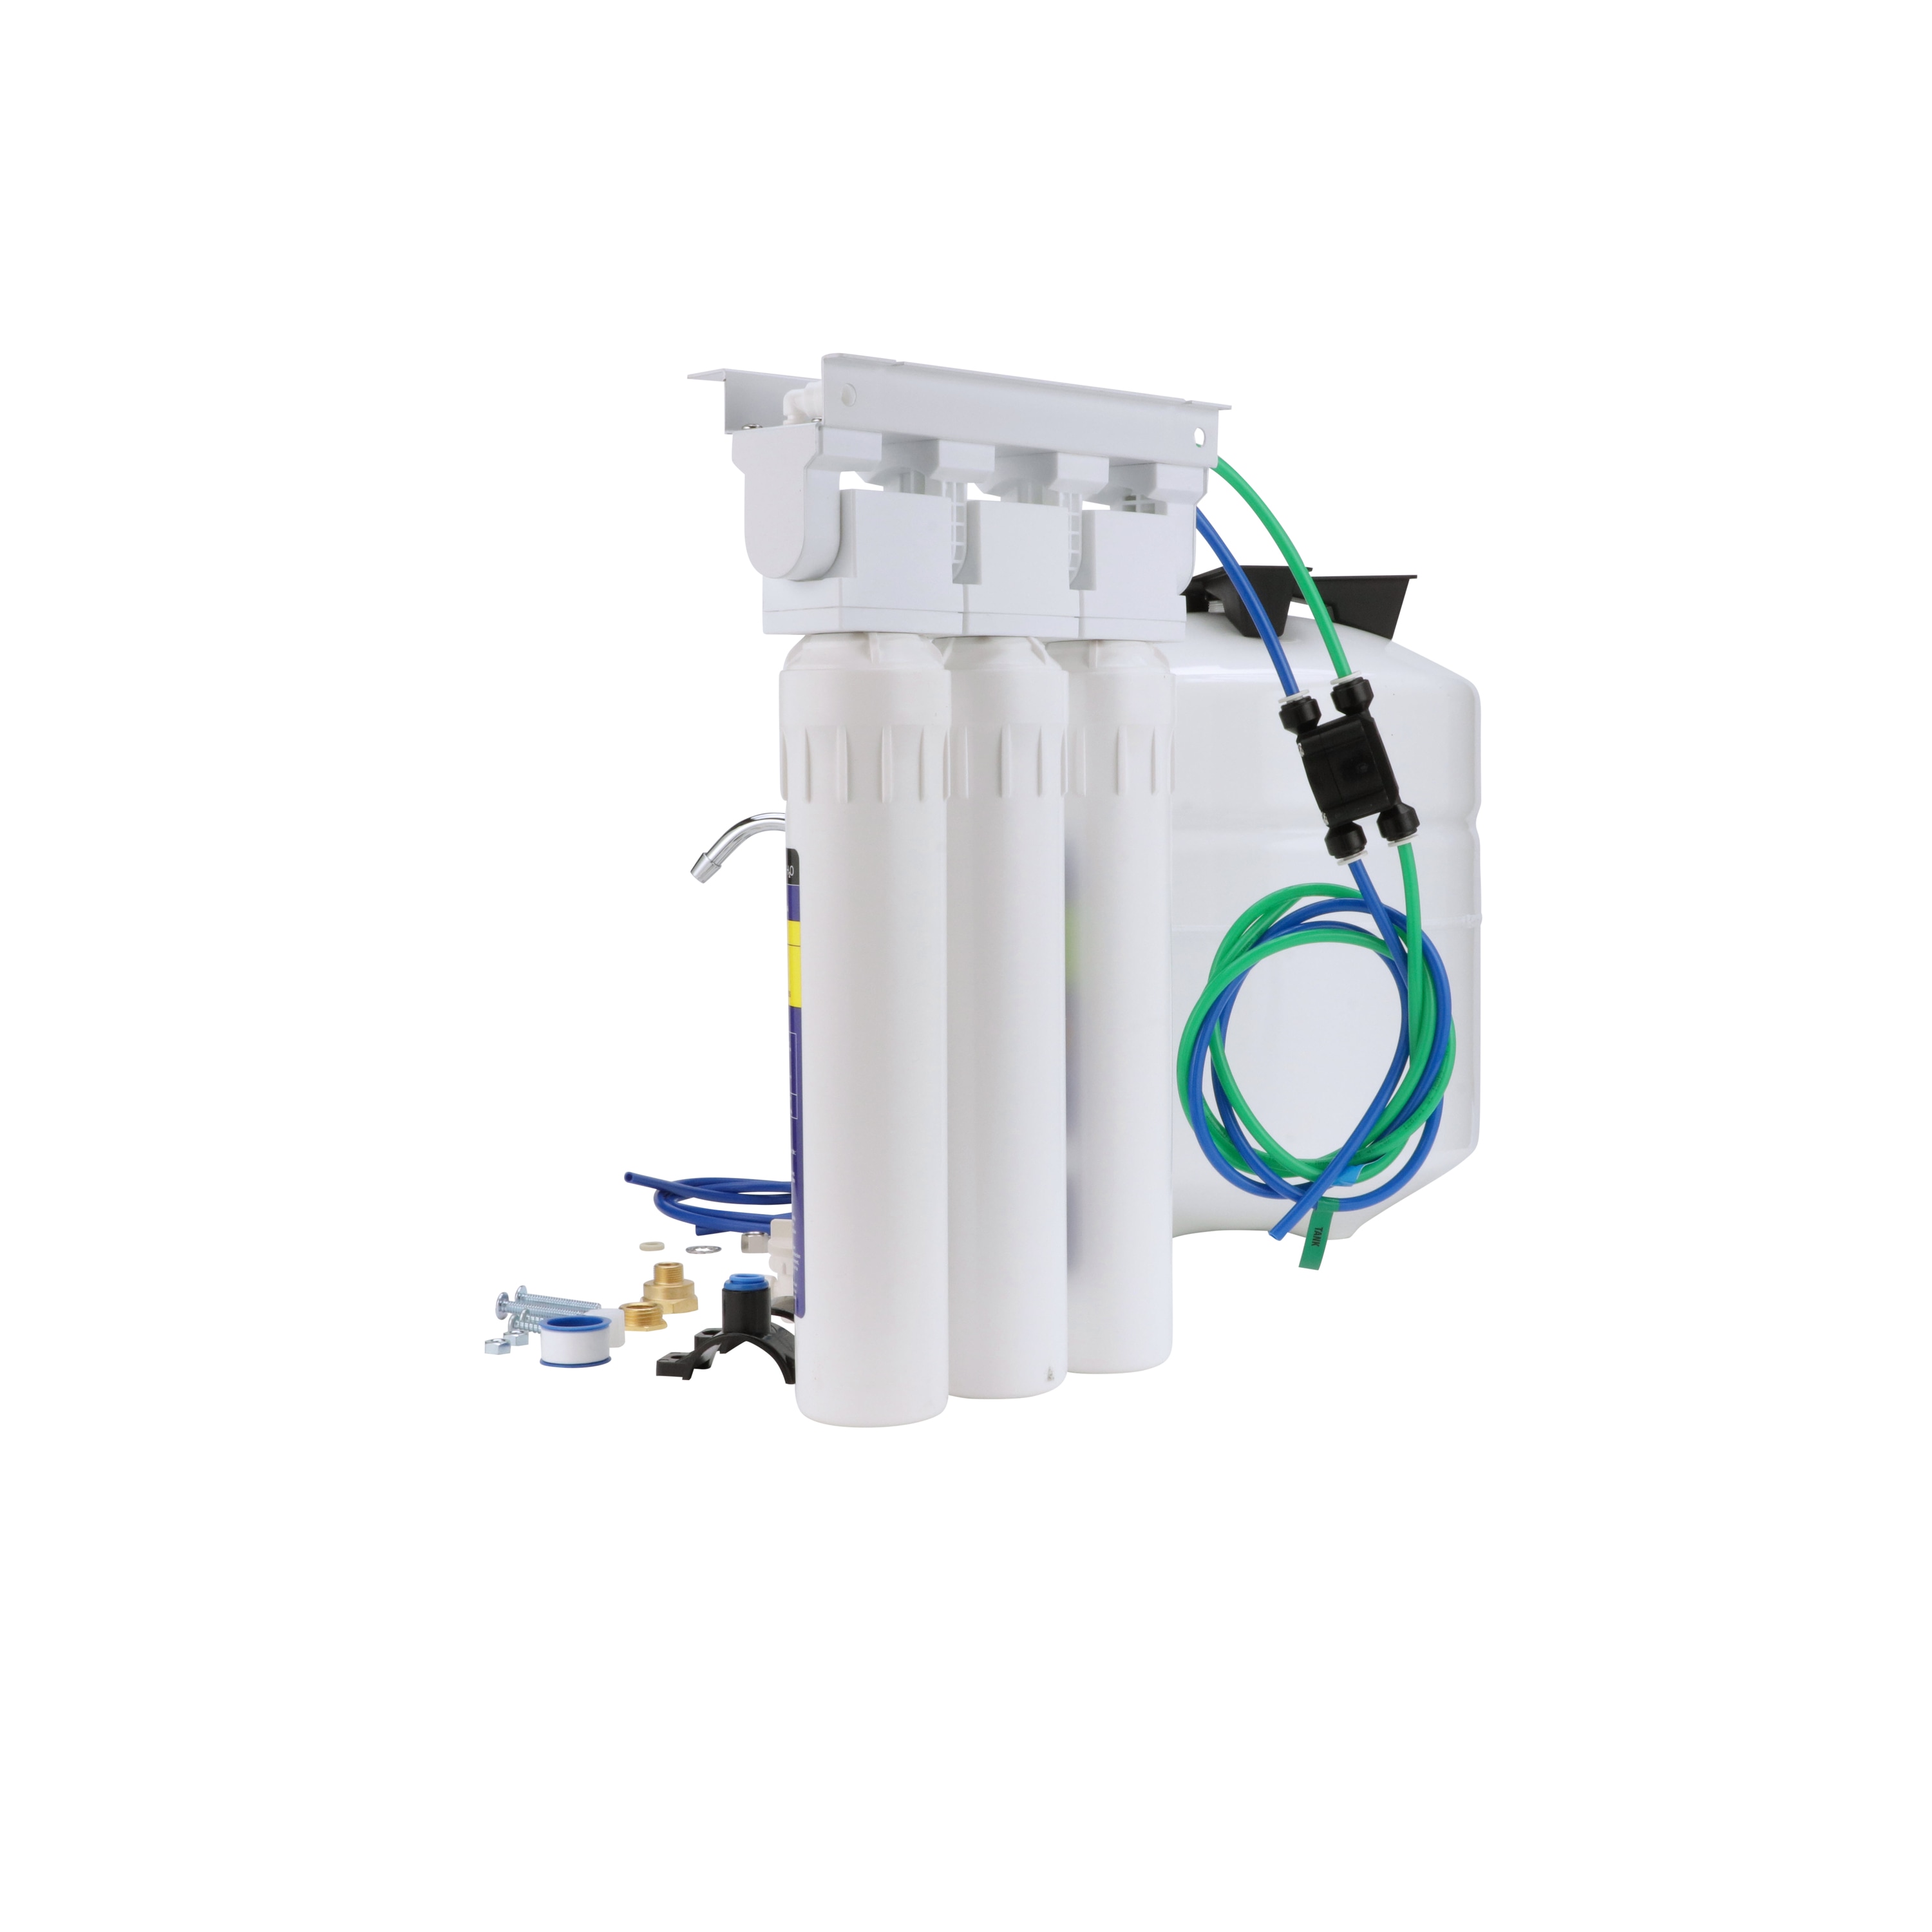 Watts Pure H2O Triple-stage Carbon Block Reverse Osmosis